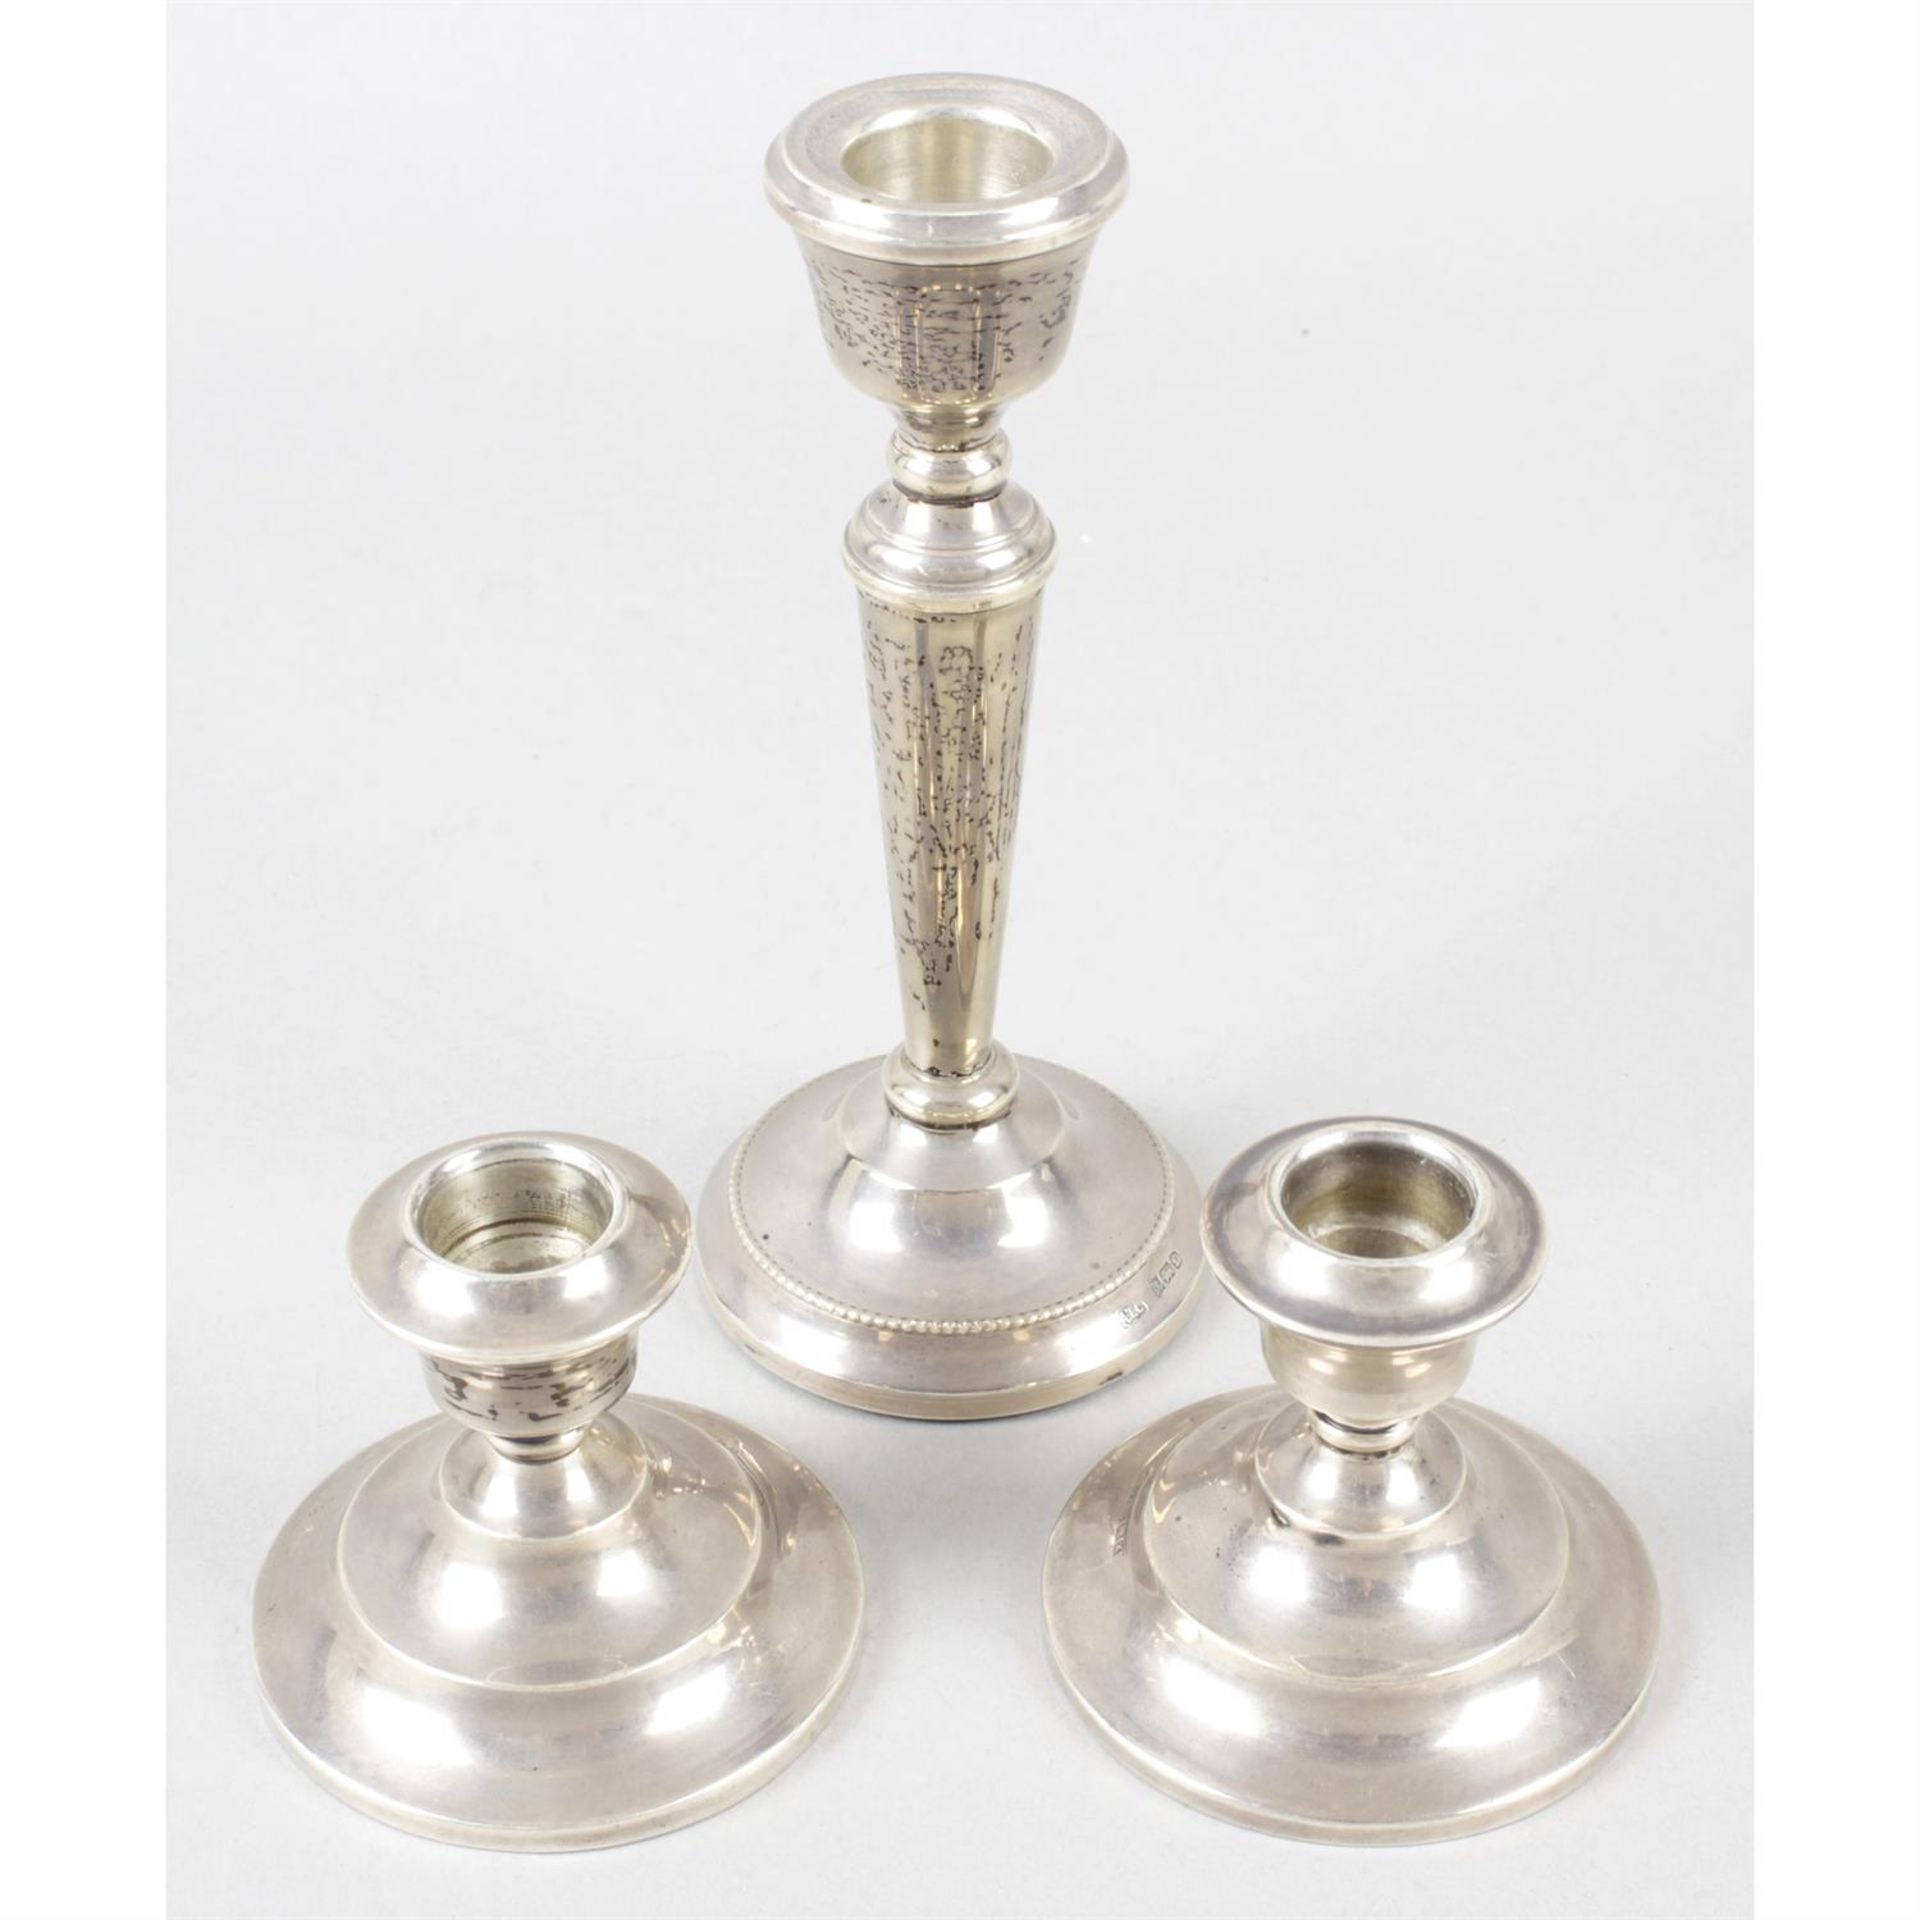 A pair of mid-20th century silver dwarf candlesticks, together with a later silver single